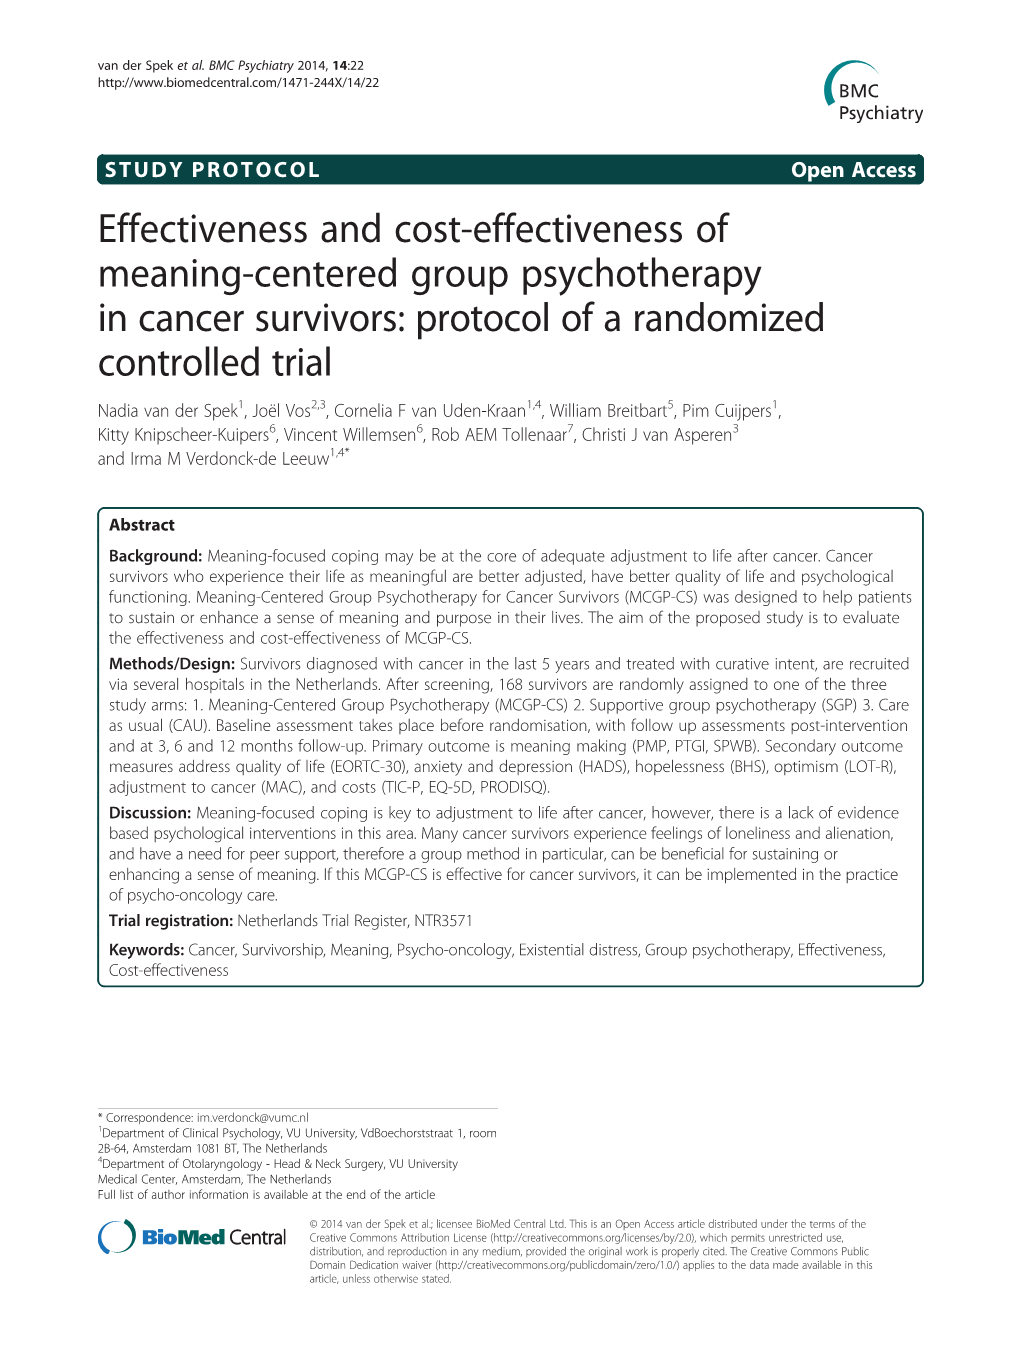 Effectiveness and Cost-Effectiveness of Meaning